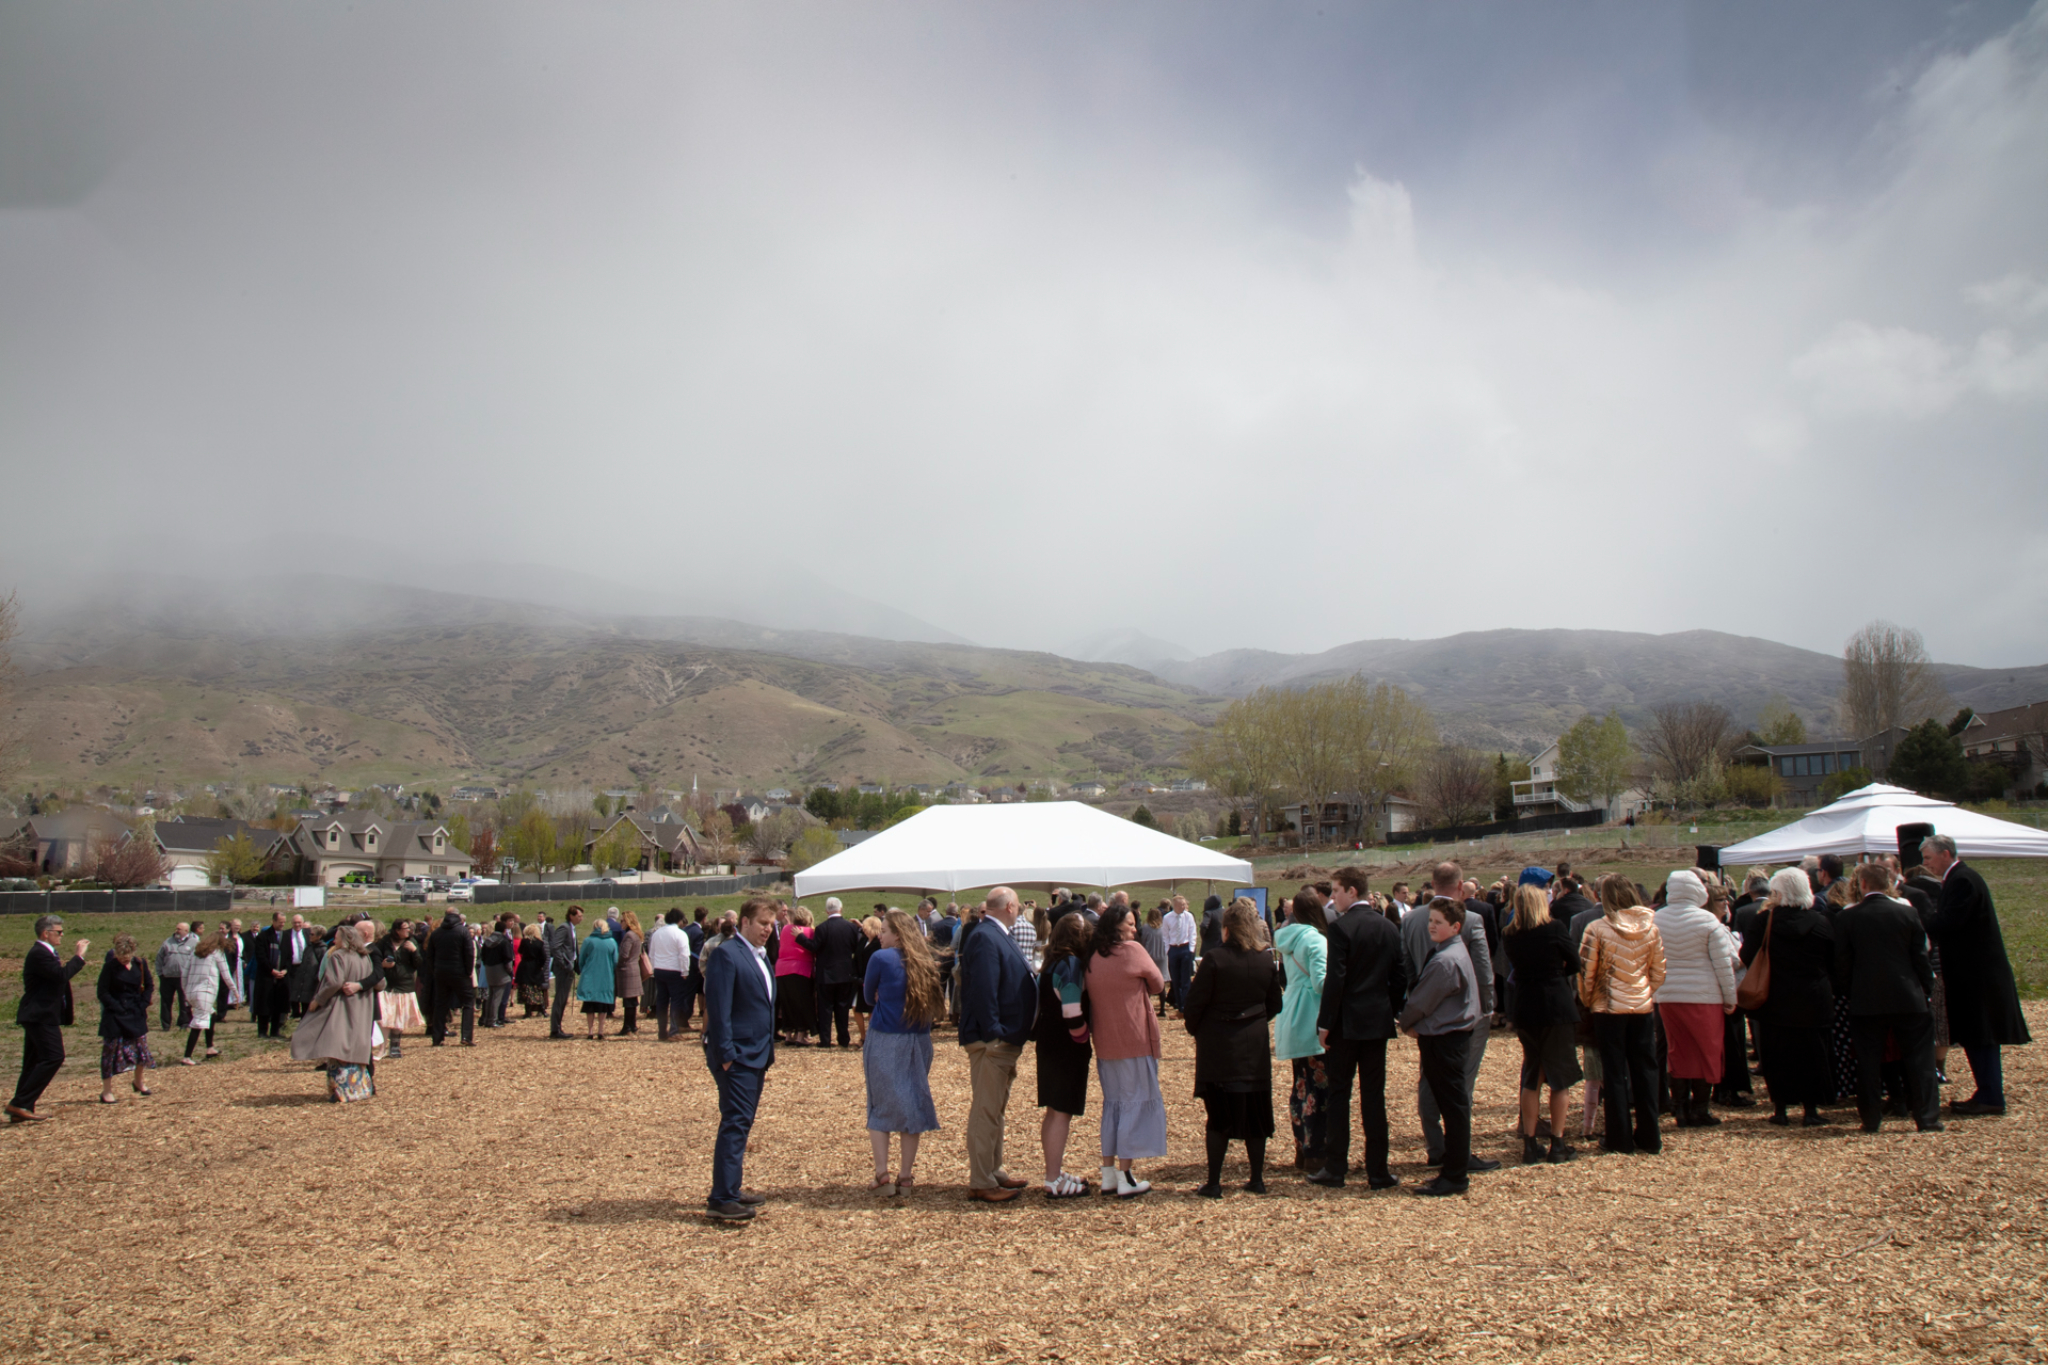 A group of people in Sunday best gathered in a dirt field, with a large grass field around them.